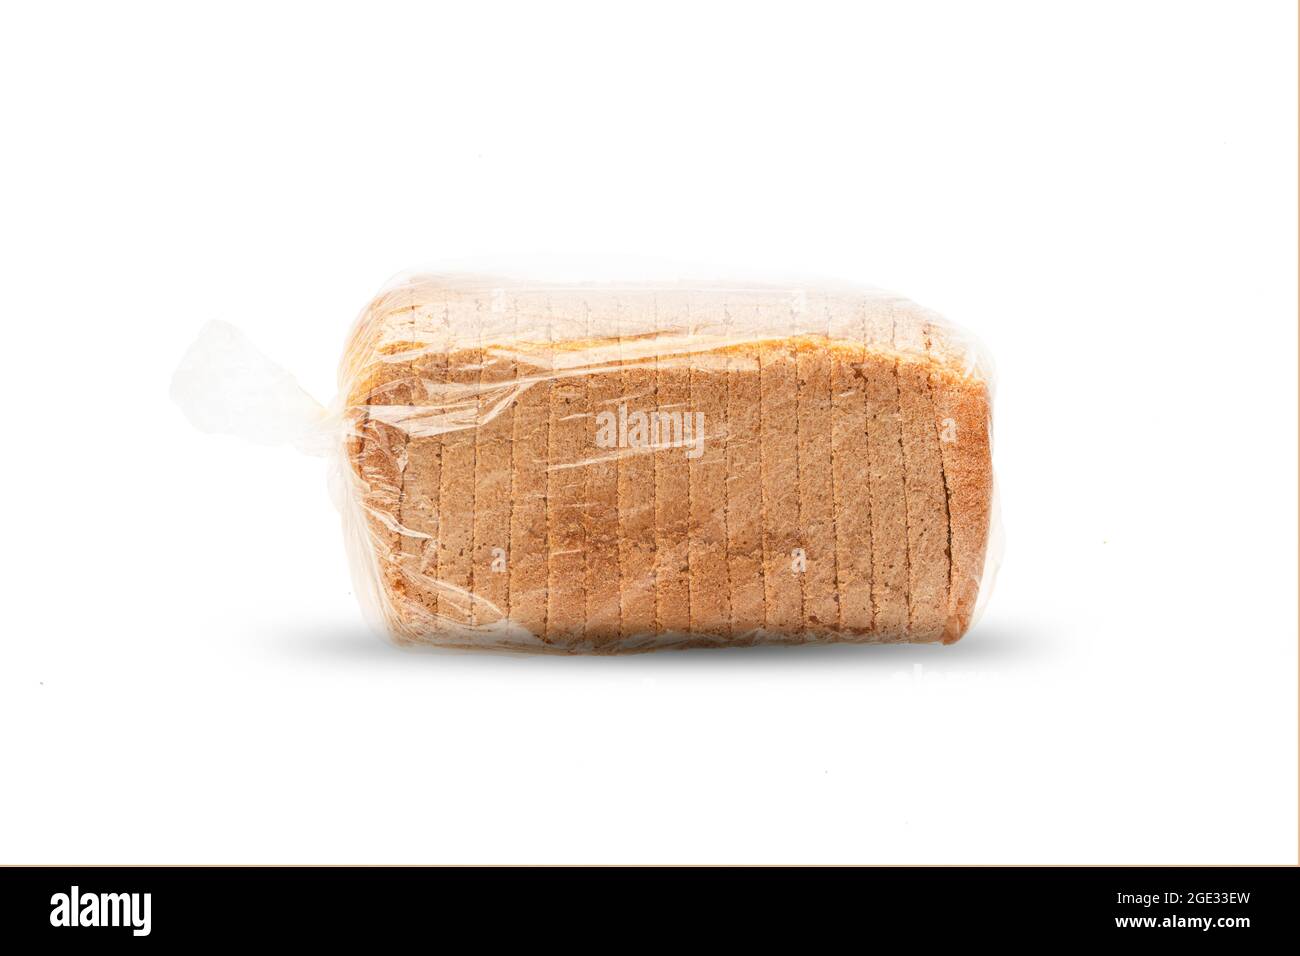 single loaf of sliced white bread, isolate on a white background. slices of toast, side view in a cellophane package, there is a mock up. Stock Photo